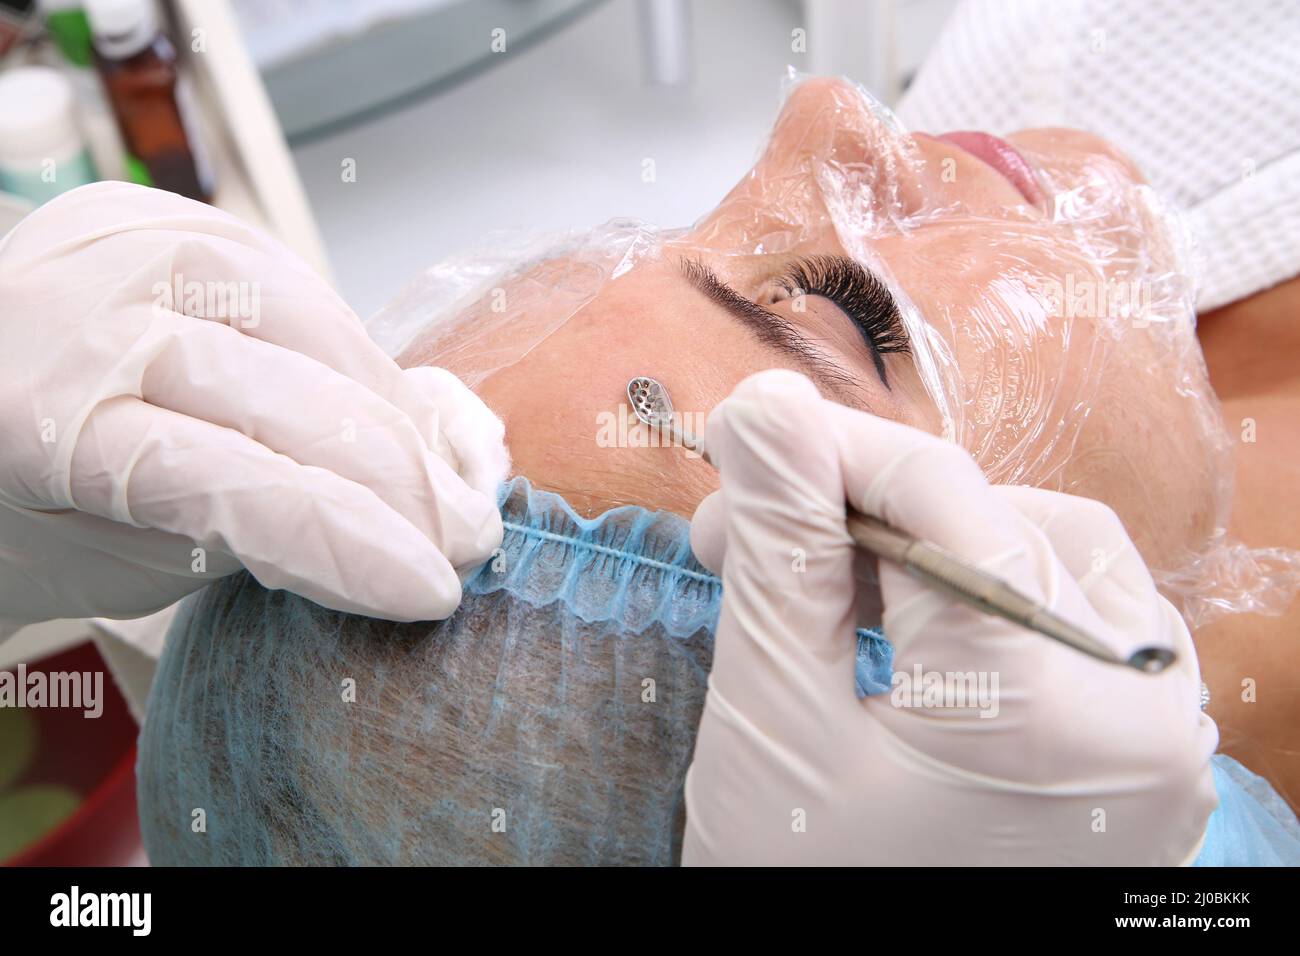 Professional cleansing of acne in a beauty salon. Stock Photo